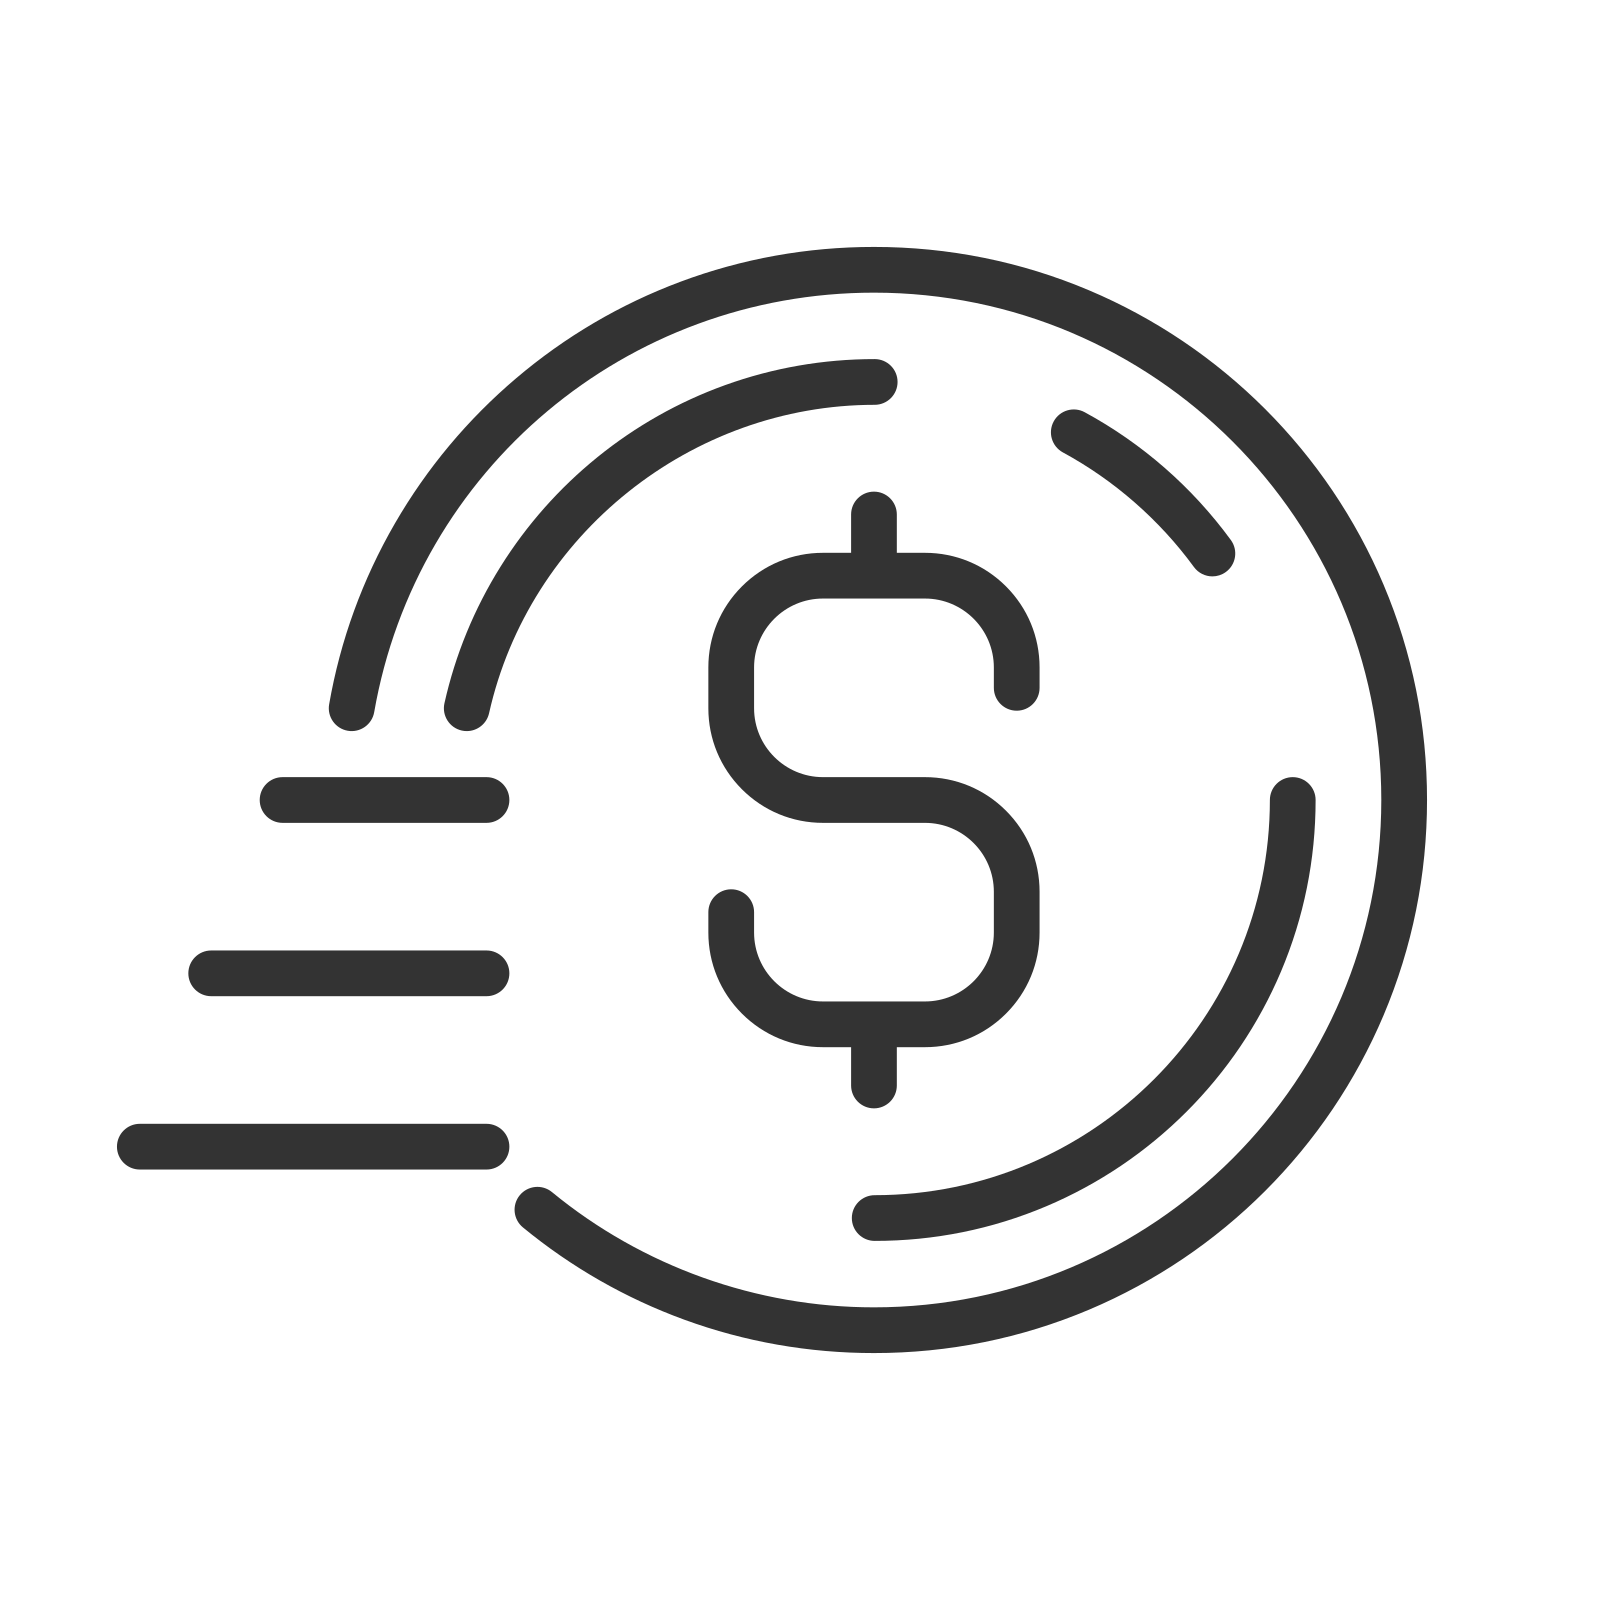 Coin In Motion icon